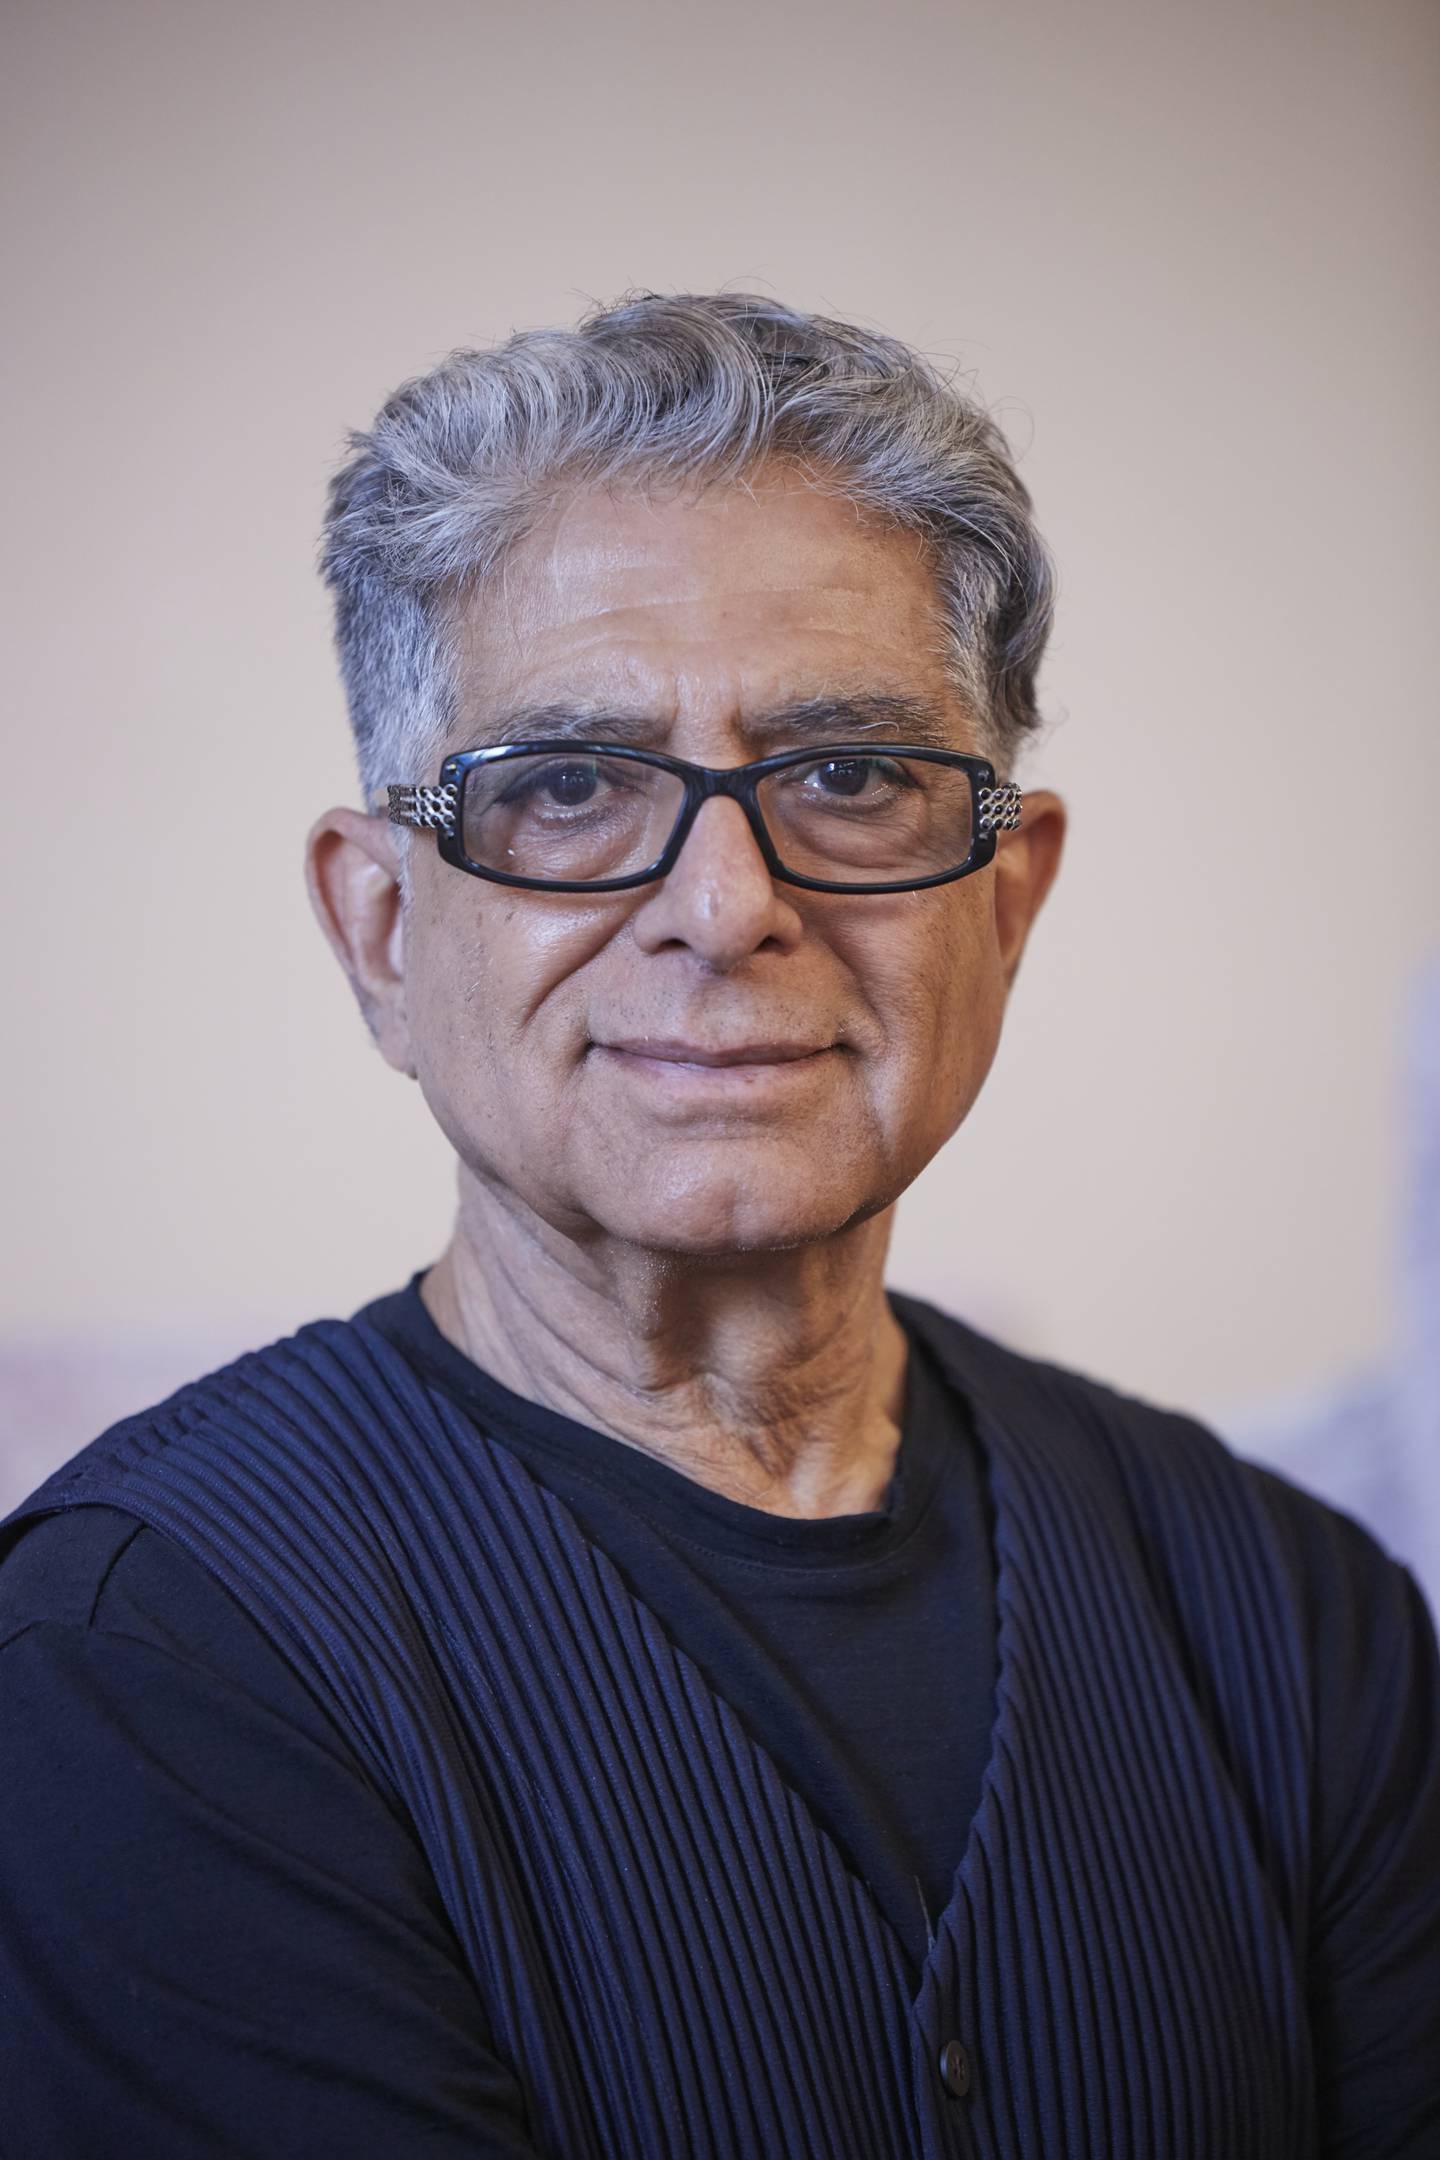 Deepak Chopra is the founder of the Chopra Foundation, a non-profit entity for research on well-being and humanitarianism.